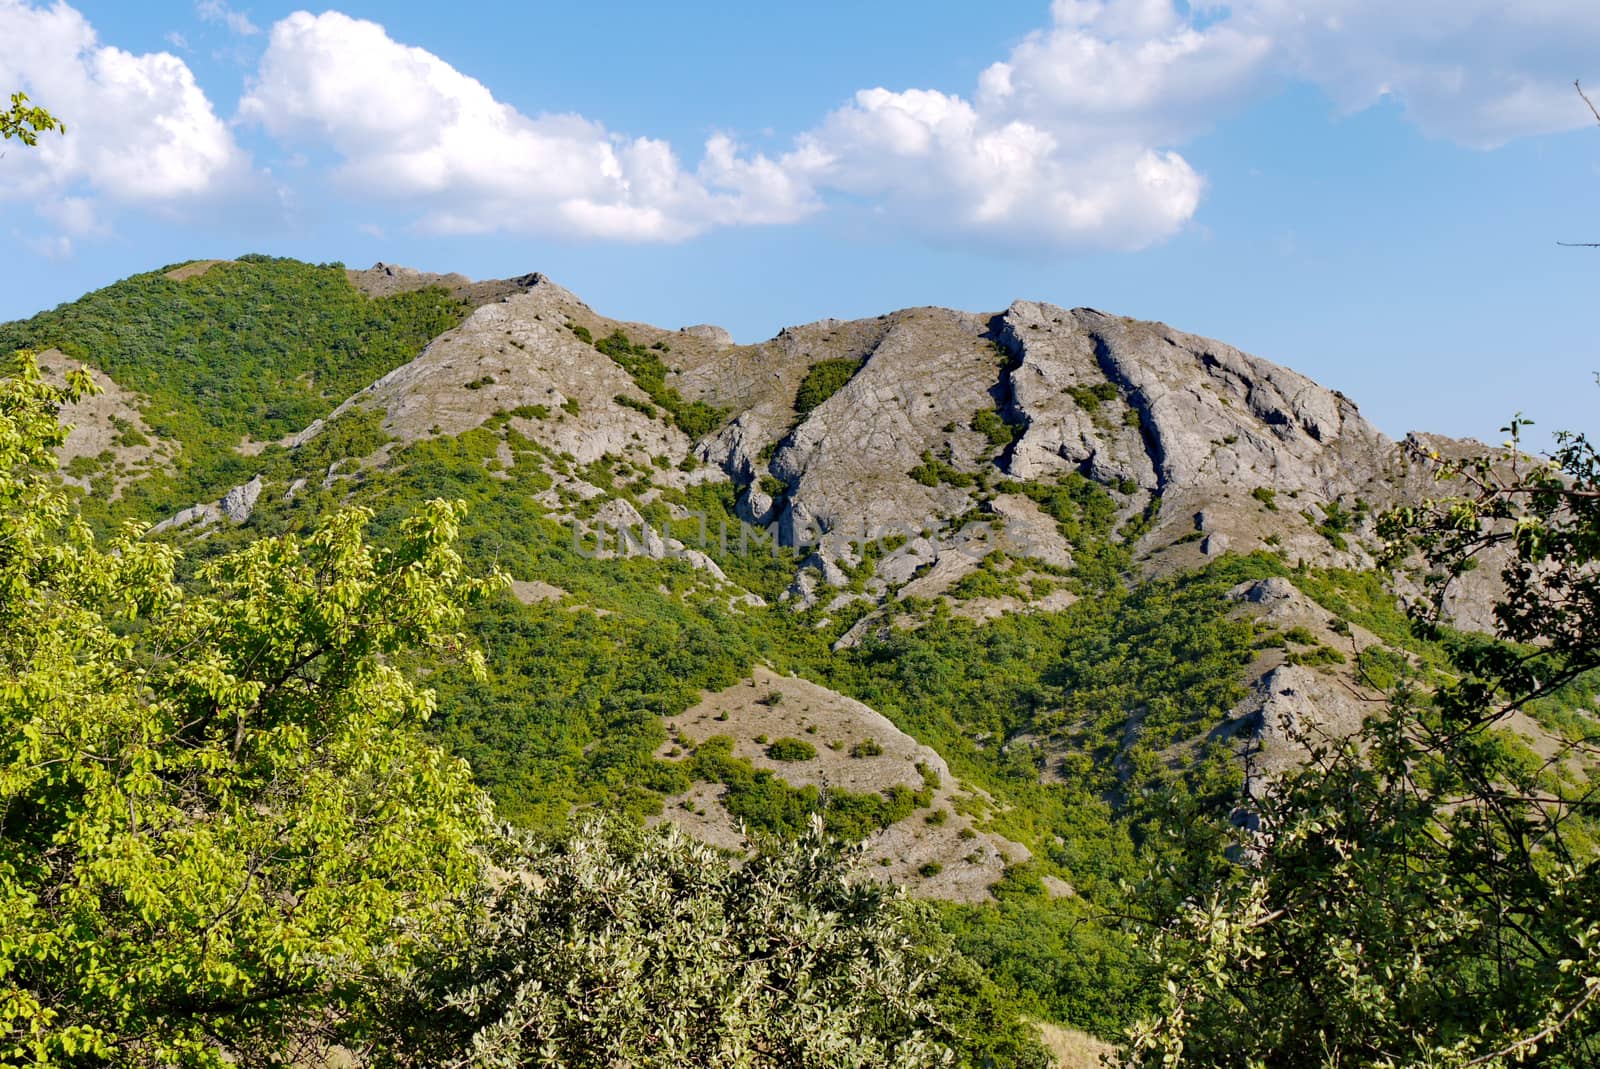 wide green bushes on the background of grass-covered mountains under the blue sky by Adamchuk